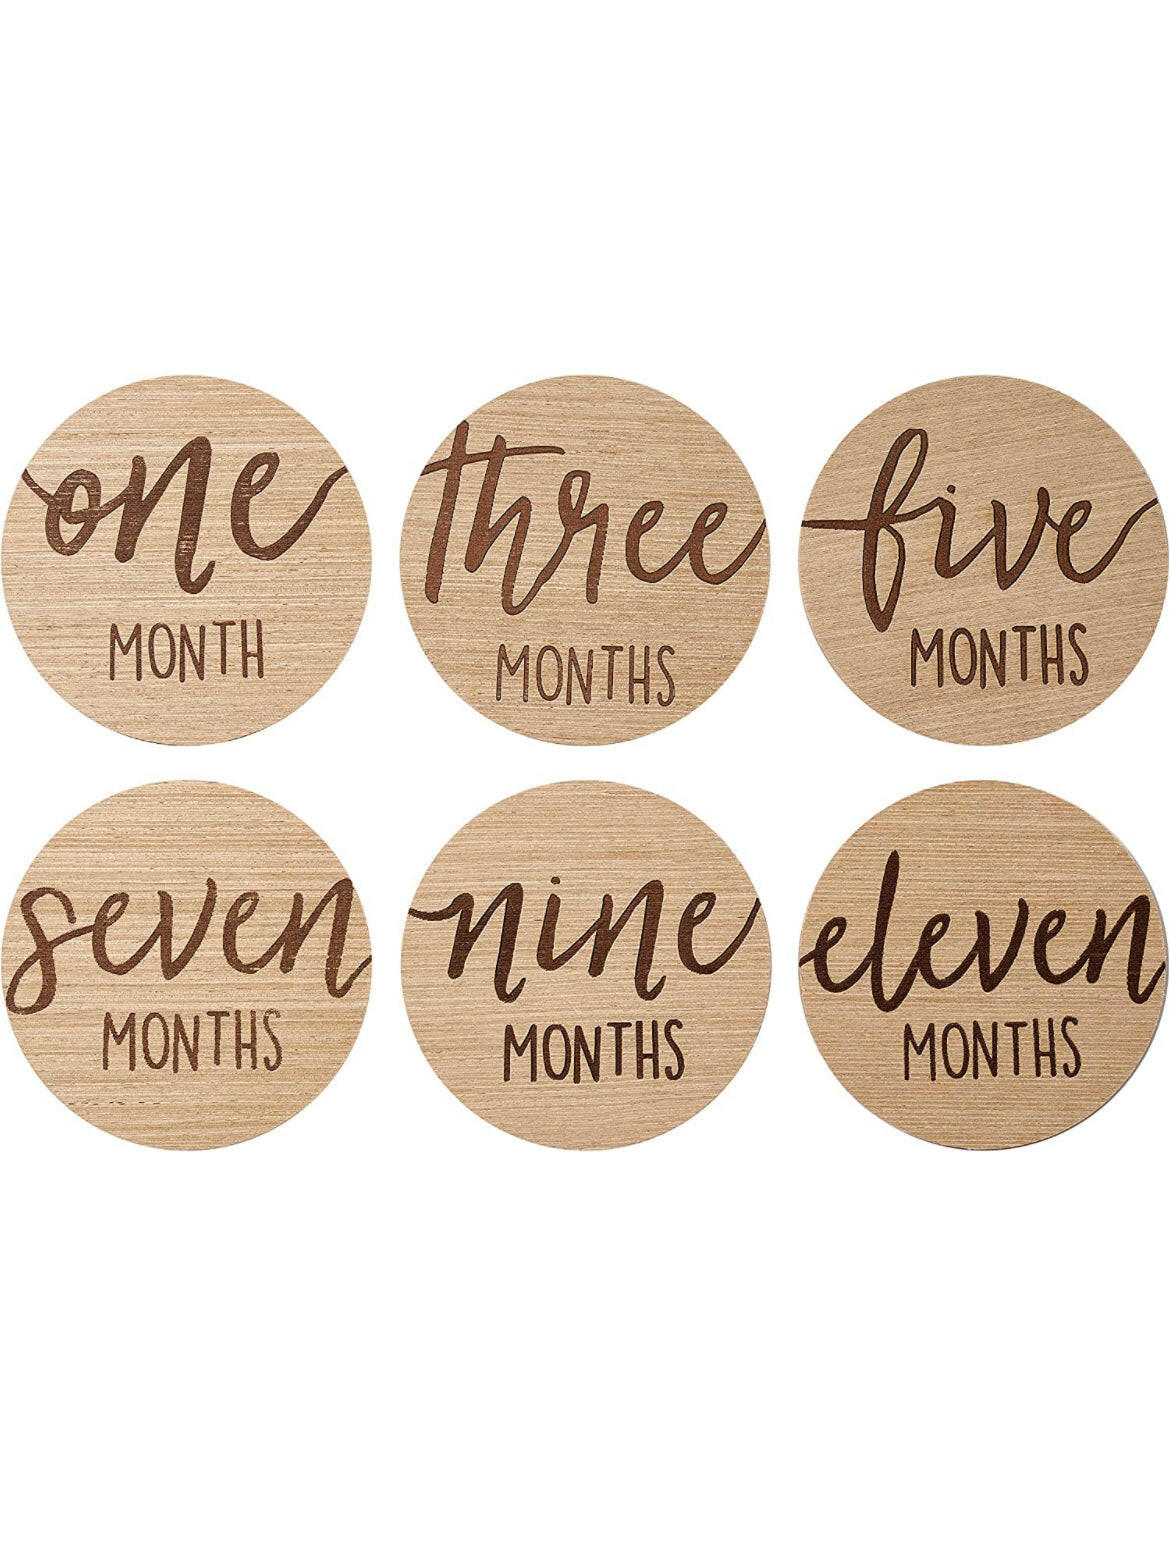 Baby Growth and Pregnancy Growth Cards, Wooden.